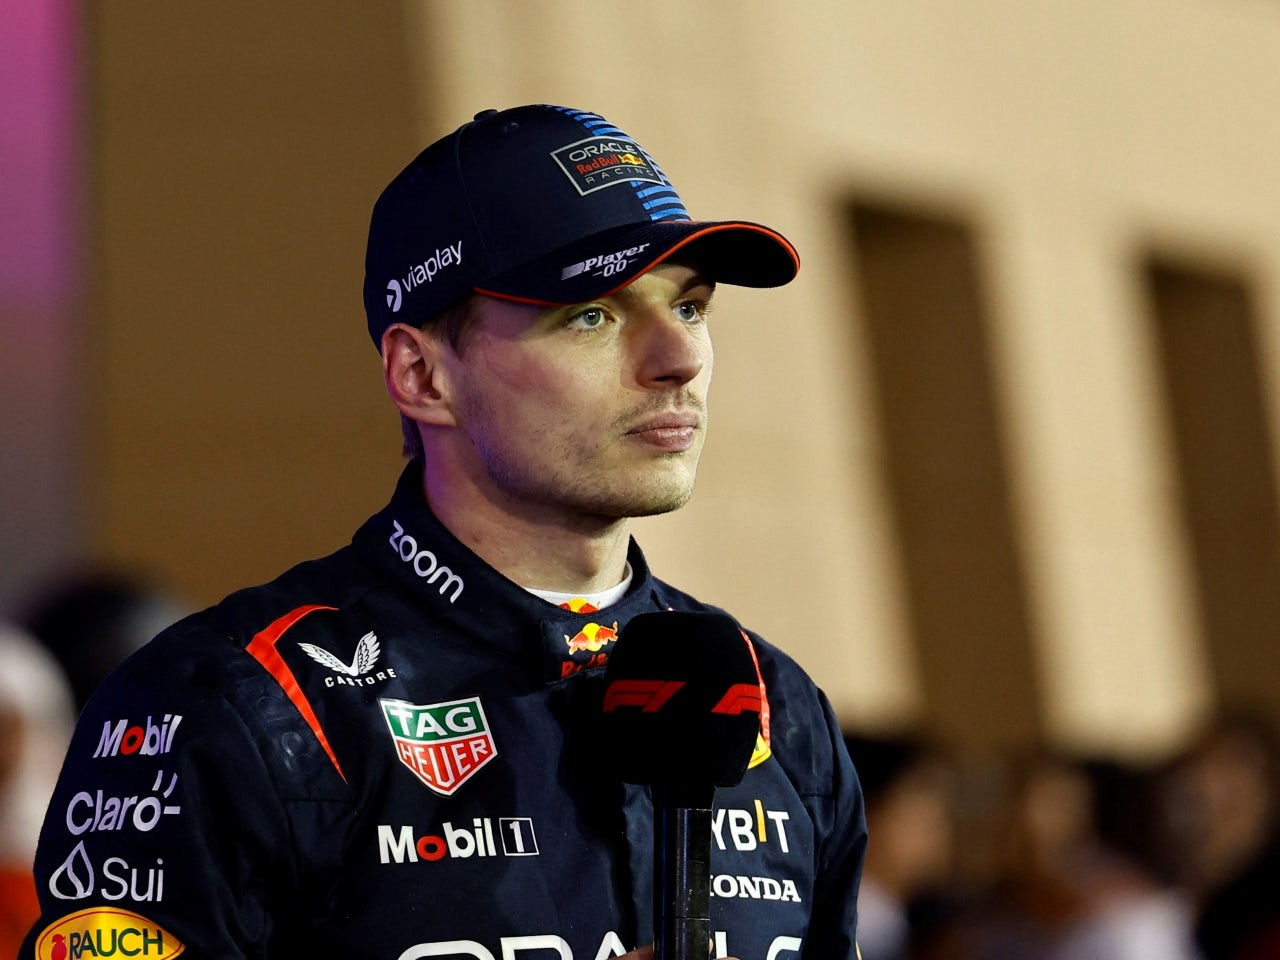 Uncertainty at Red Bull: Verstappen unclear on Monaco setback